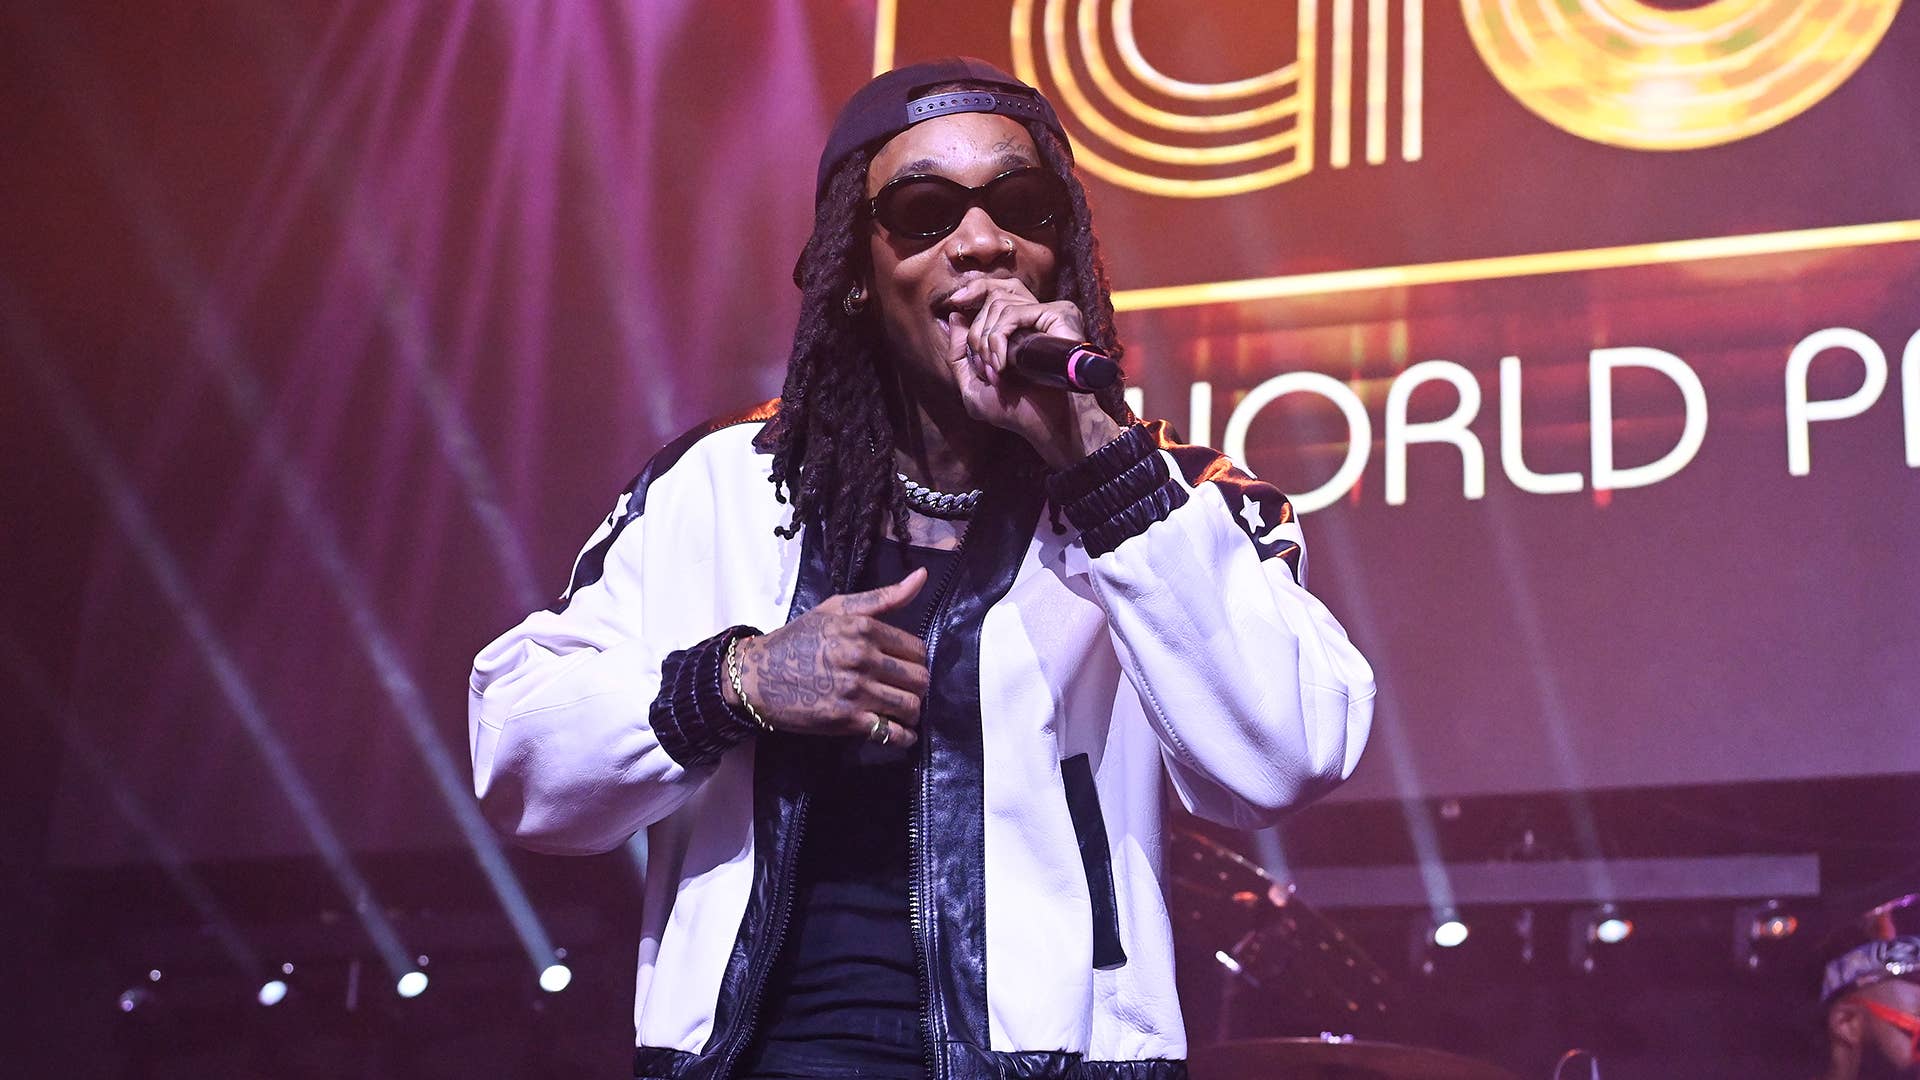 Wiz Khalifa at the concert celebrating the premiere of "Spinning Gold" held at Avalon